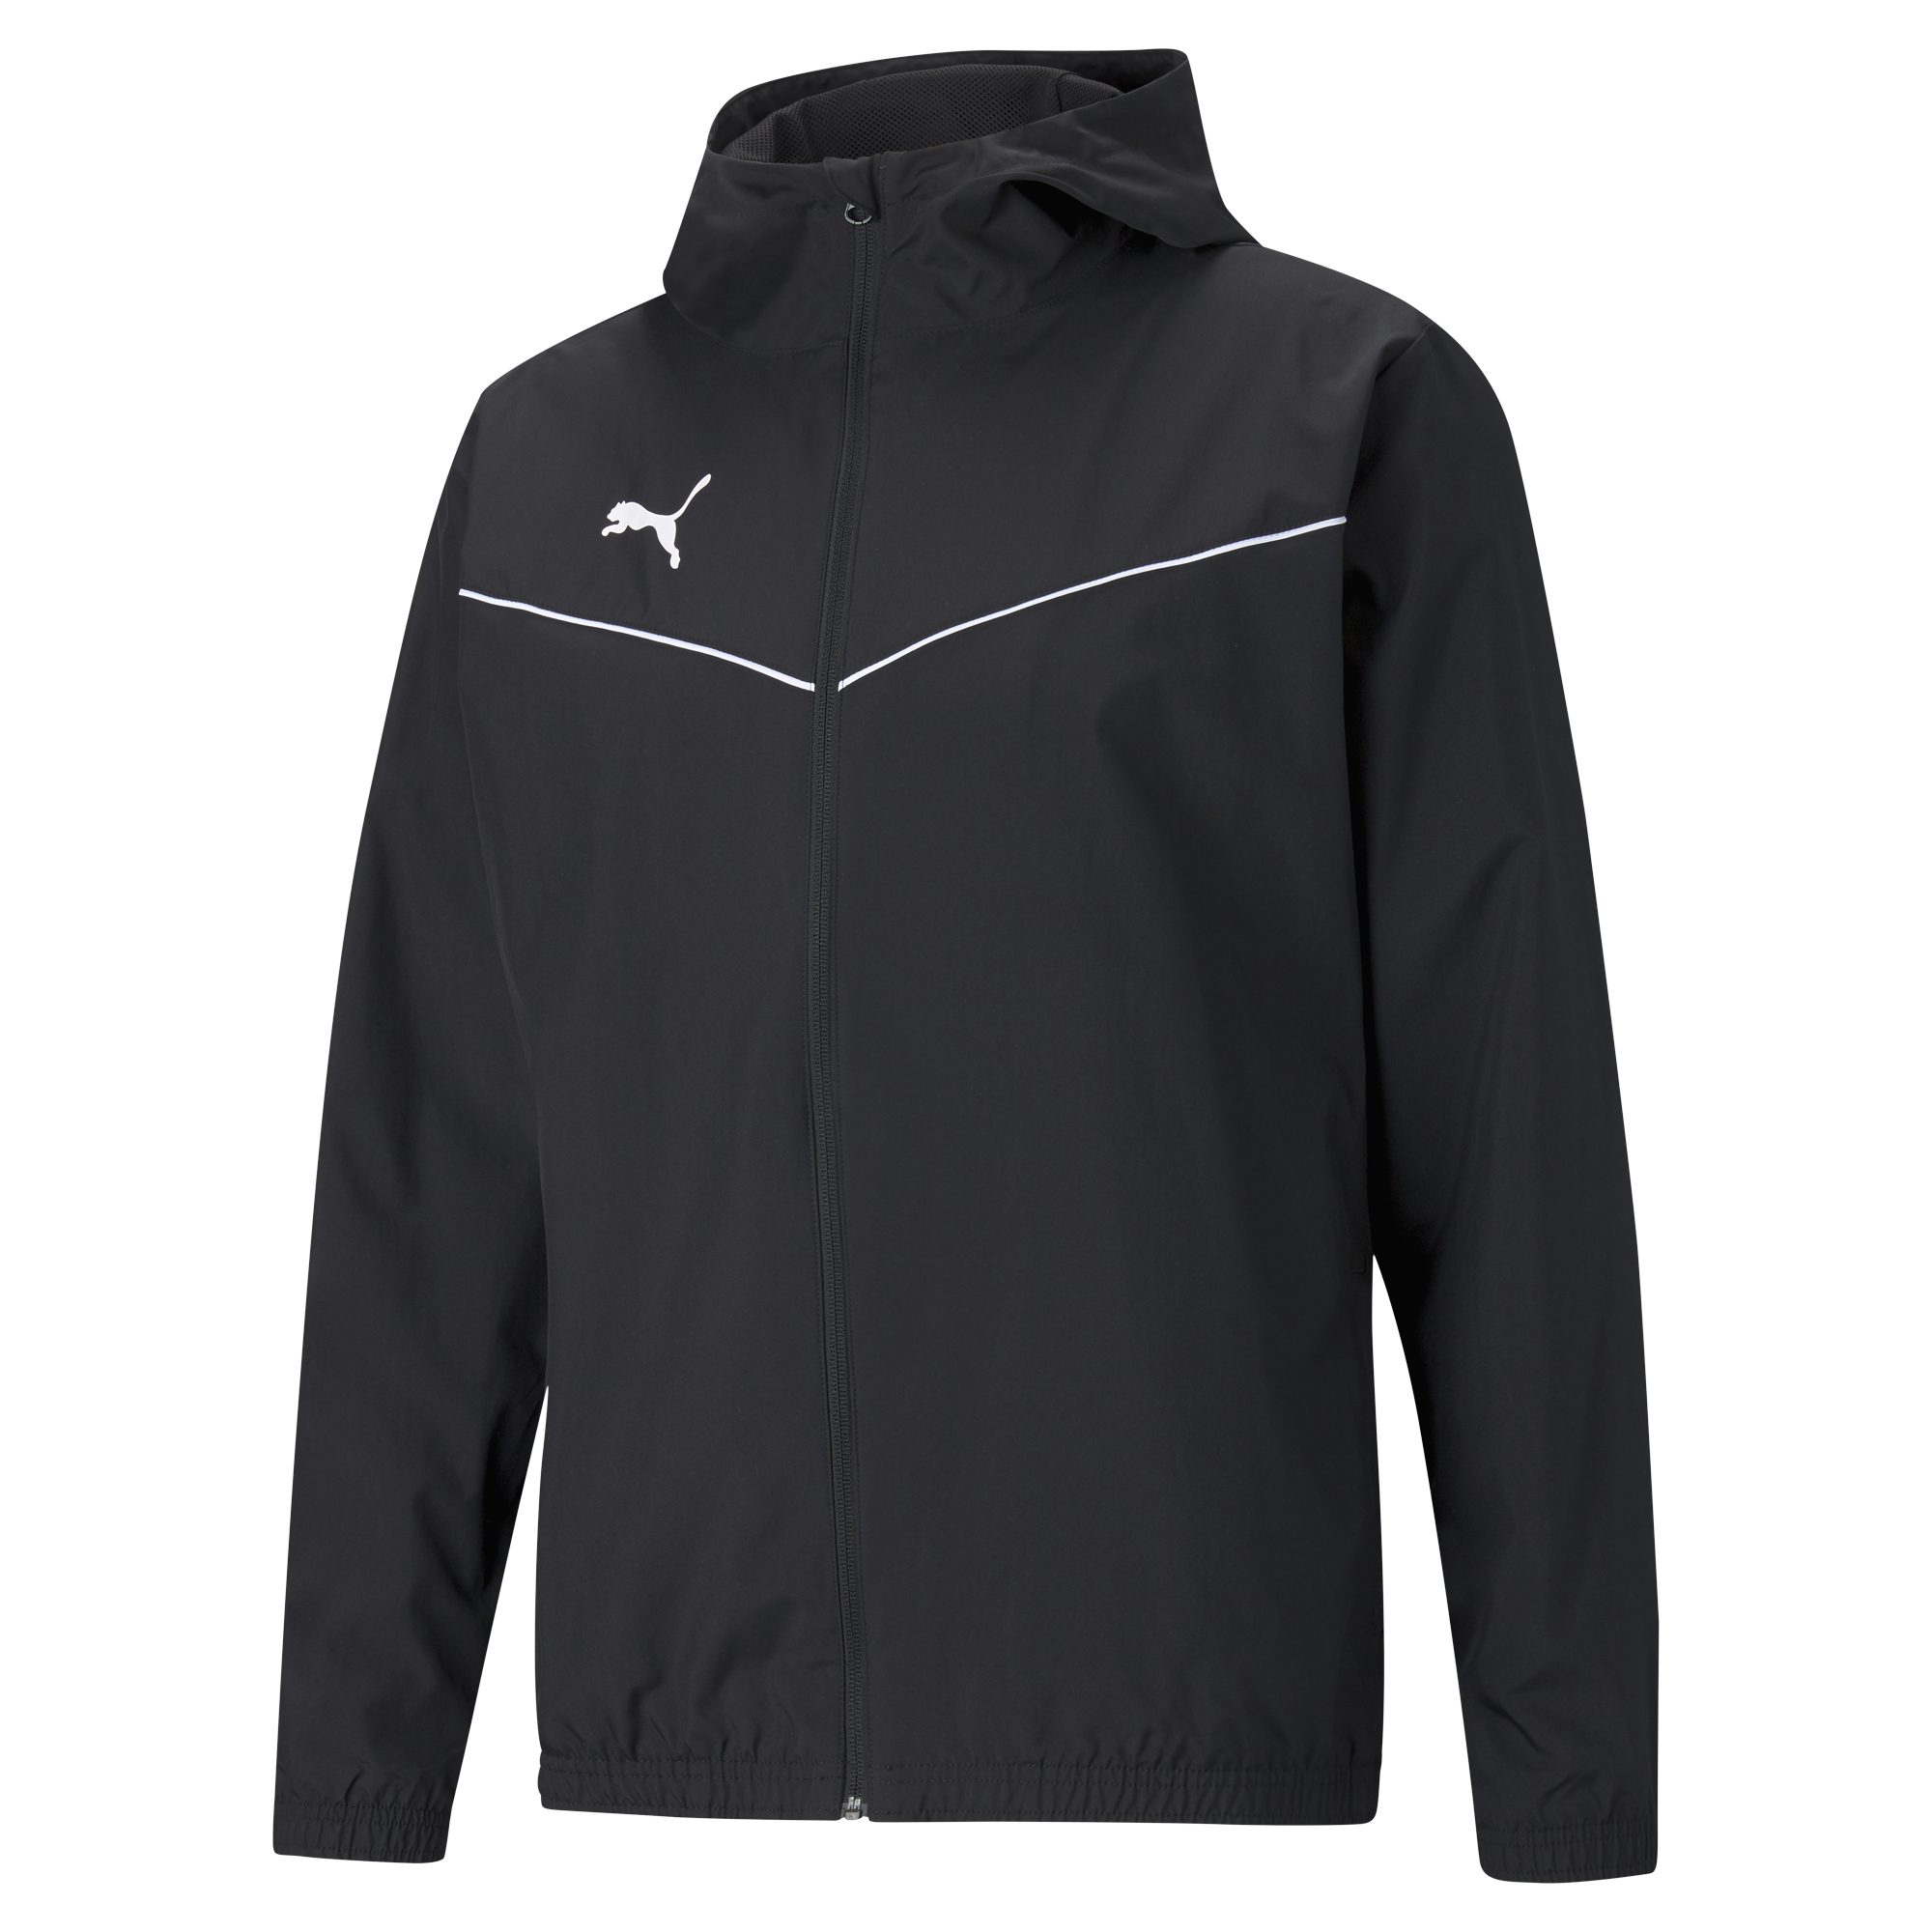 TEAM RISE All Weather Jacket Snr HOOD- black - WITH LOGO - Cooks Hill ...